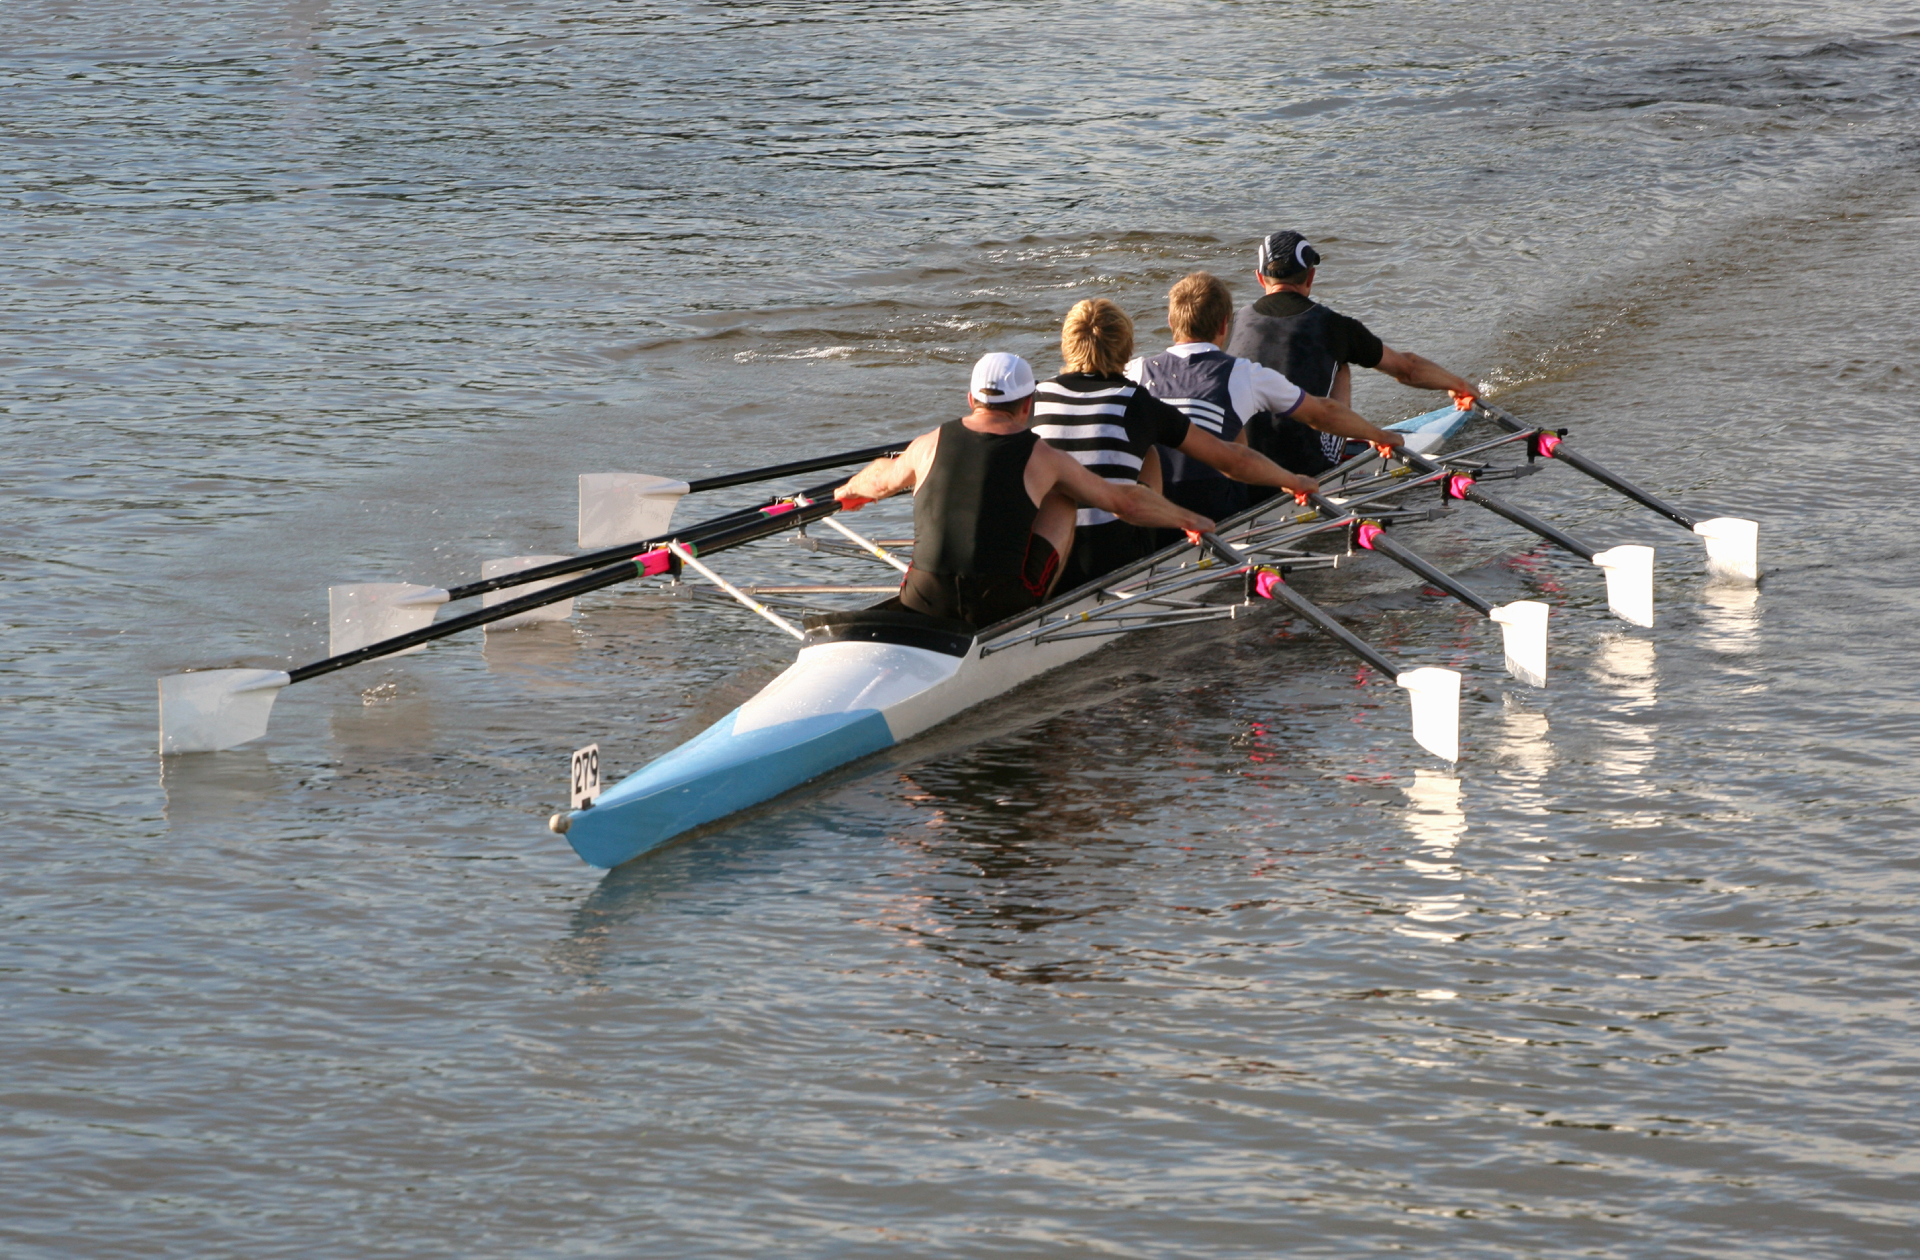 A group of people rowing in a boat